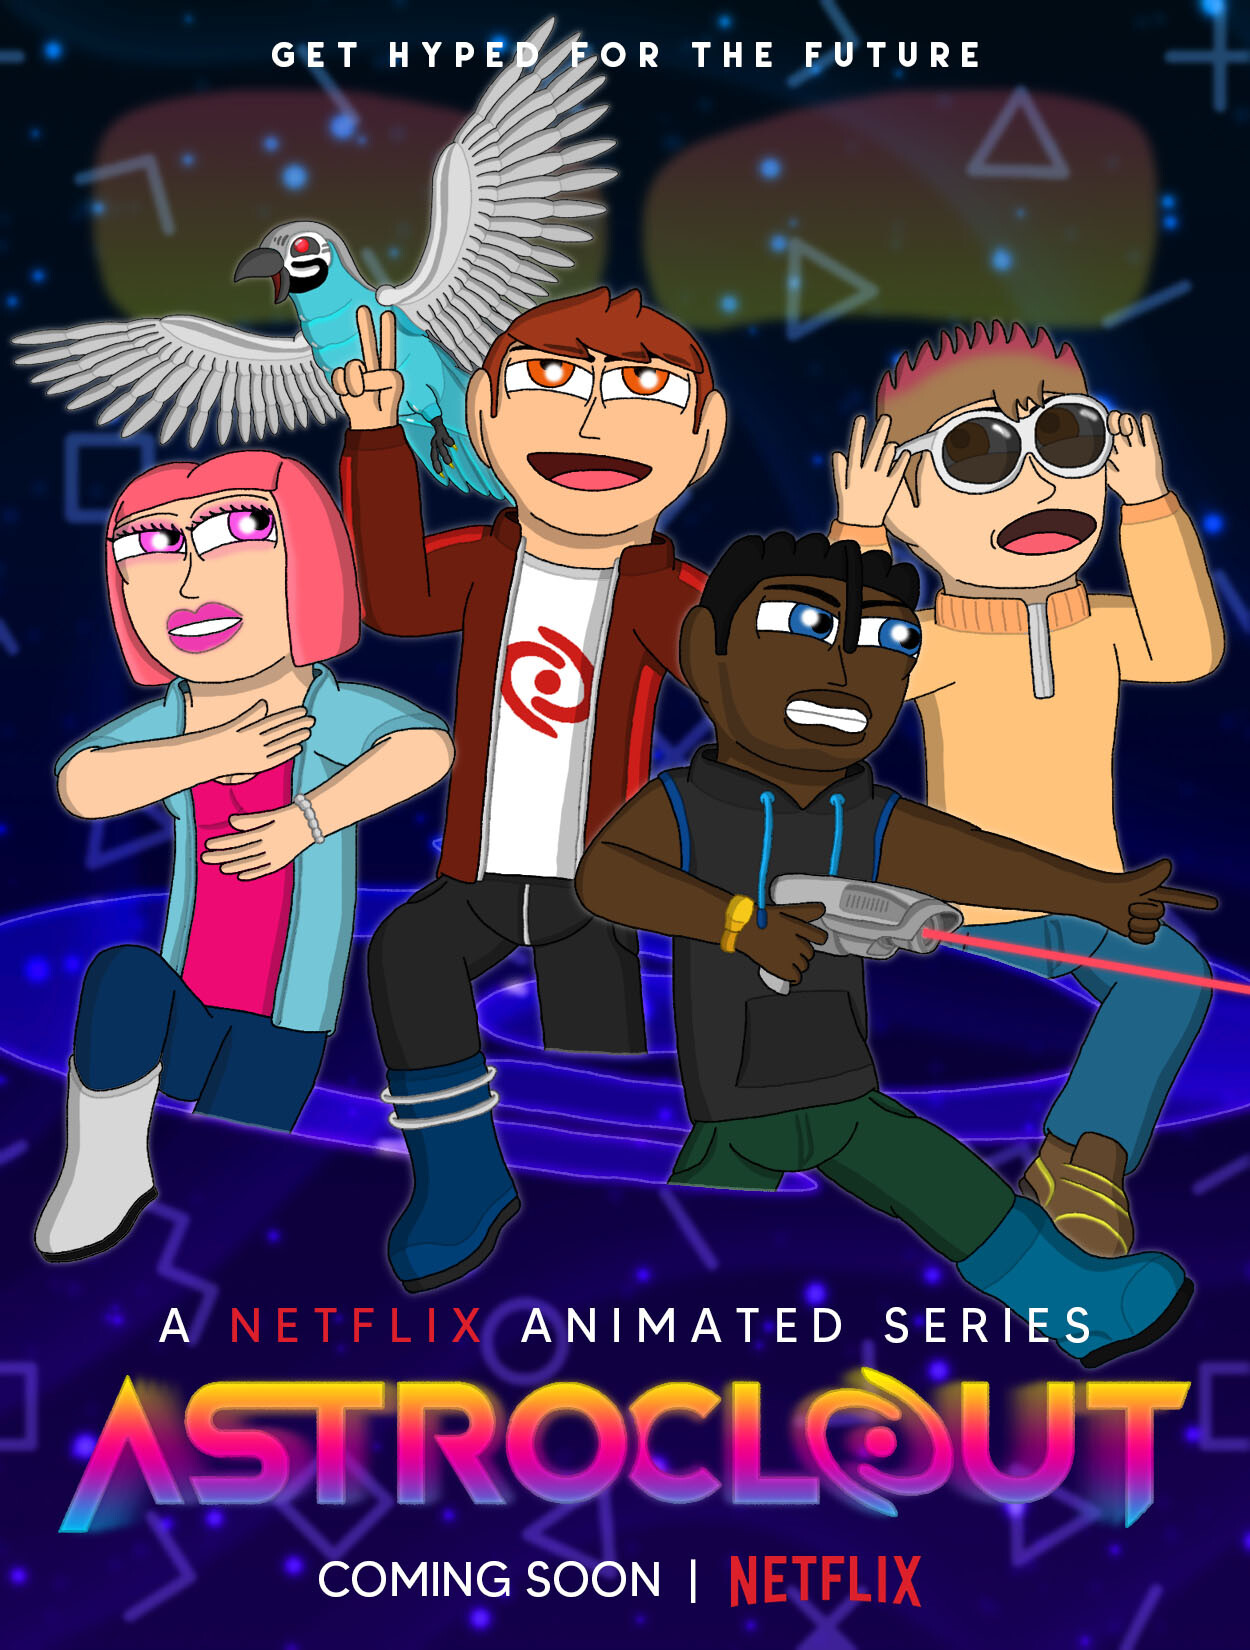 ArtStation - AstroClout Poster